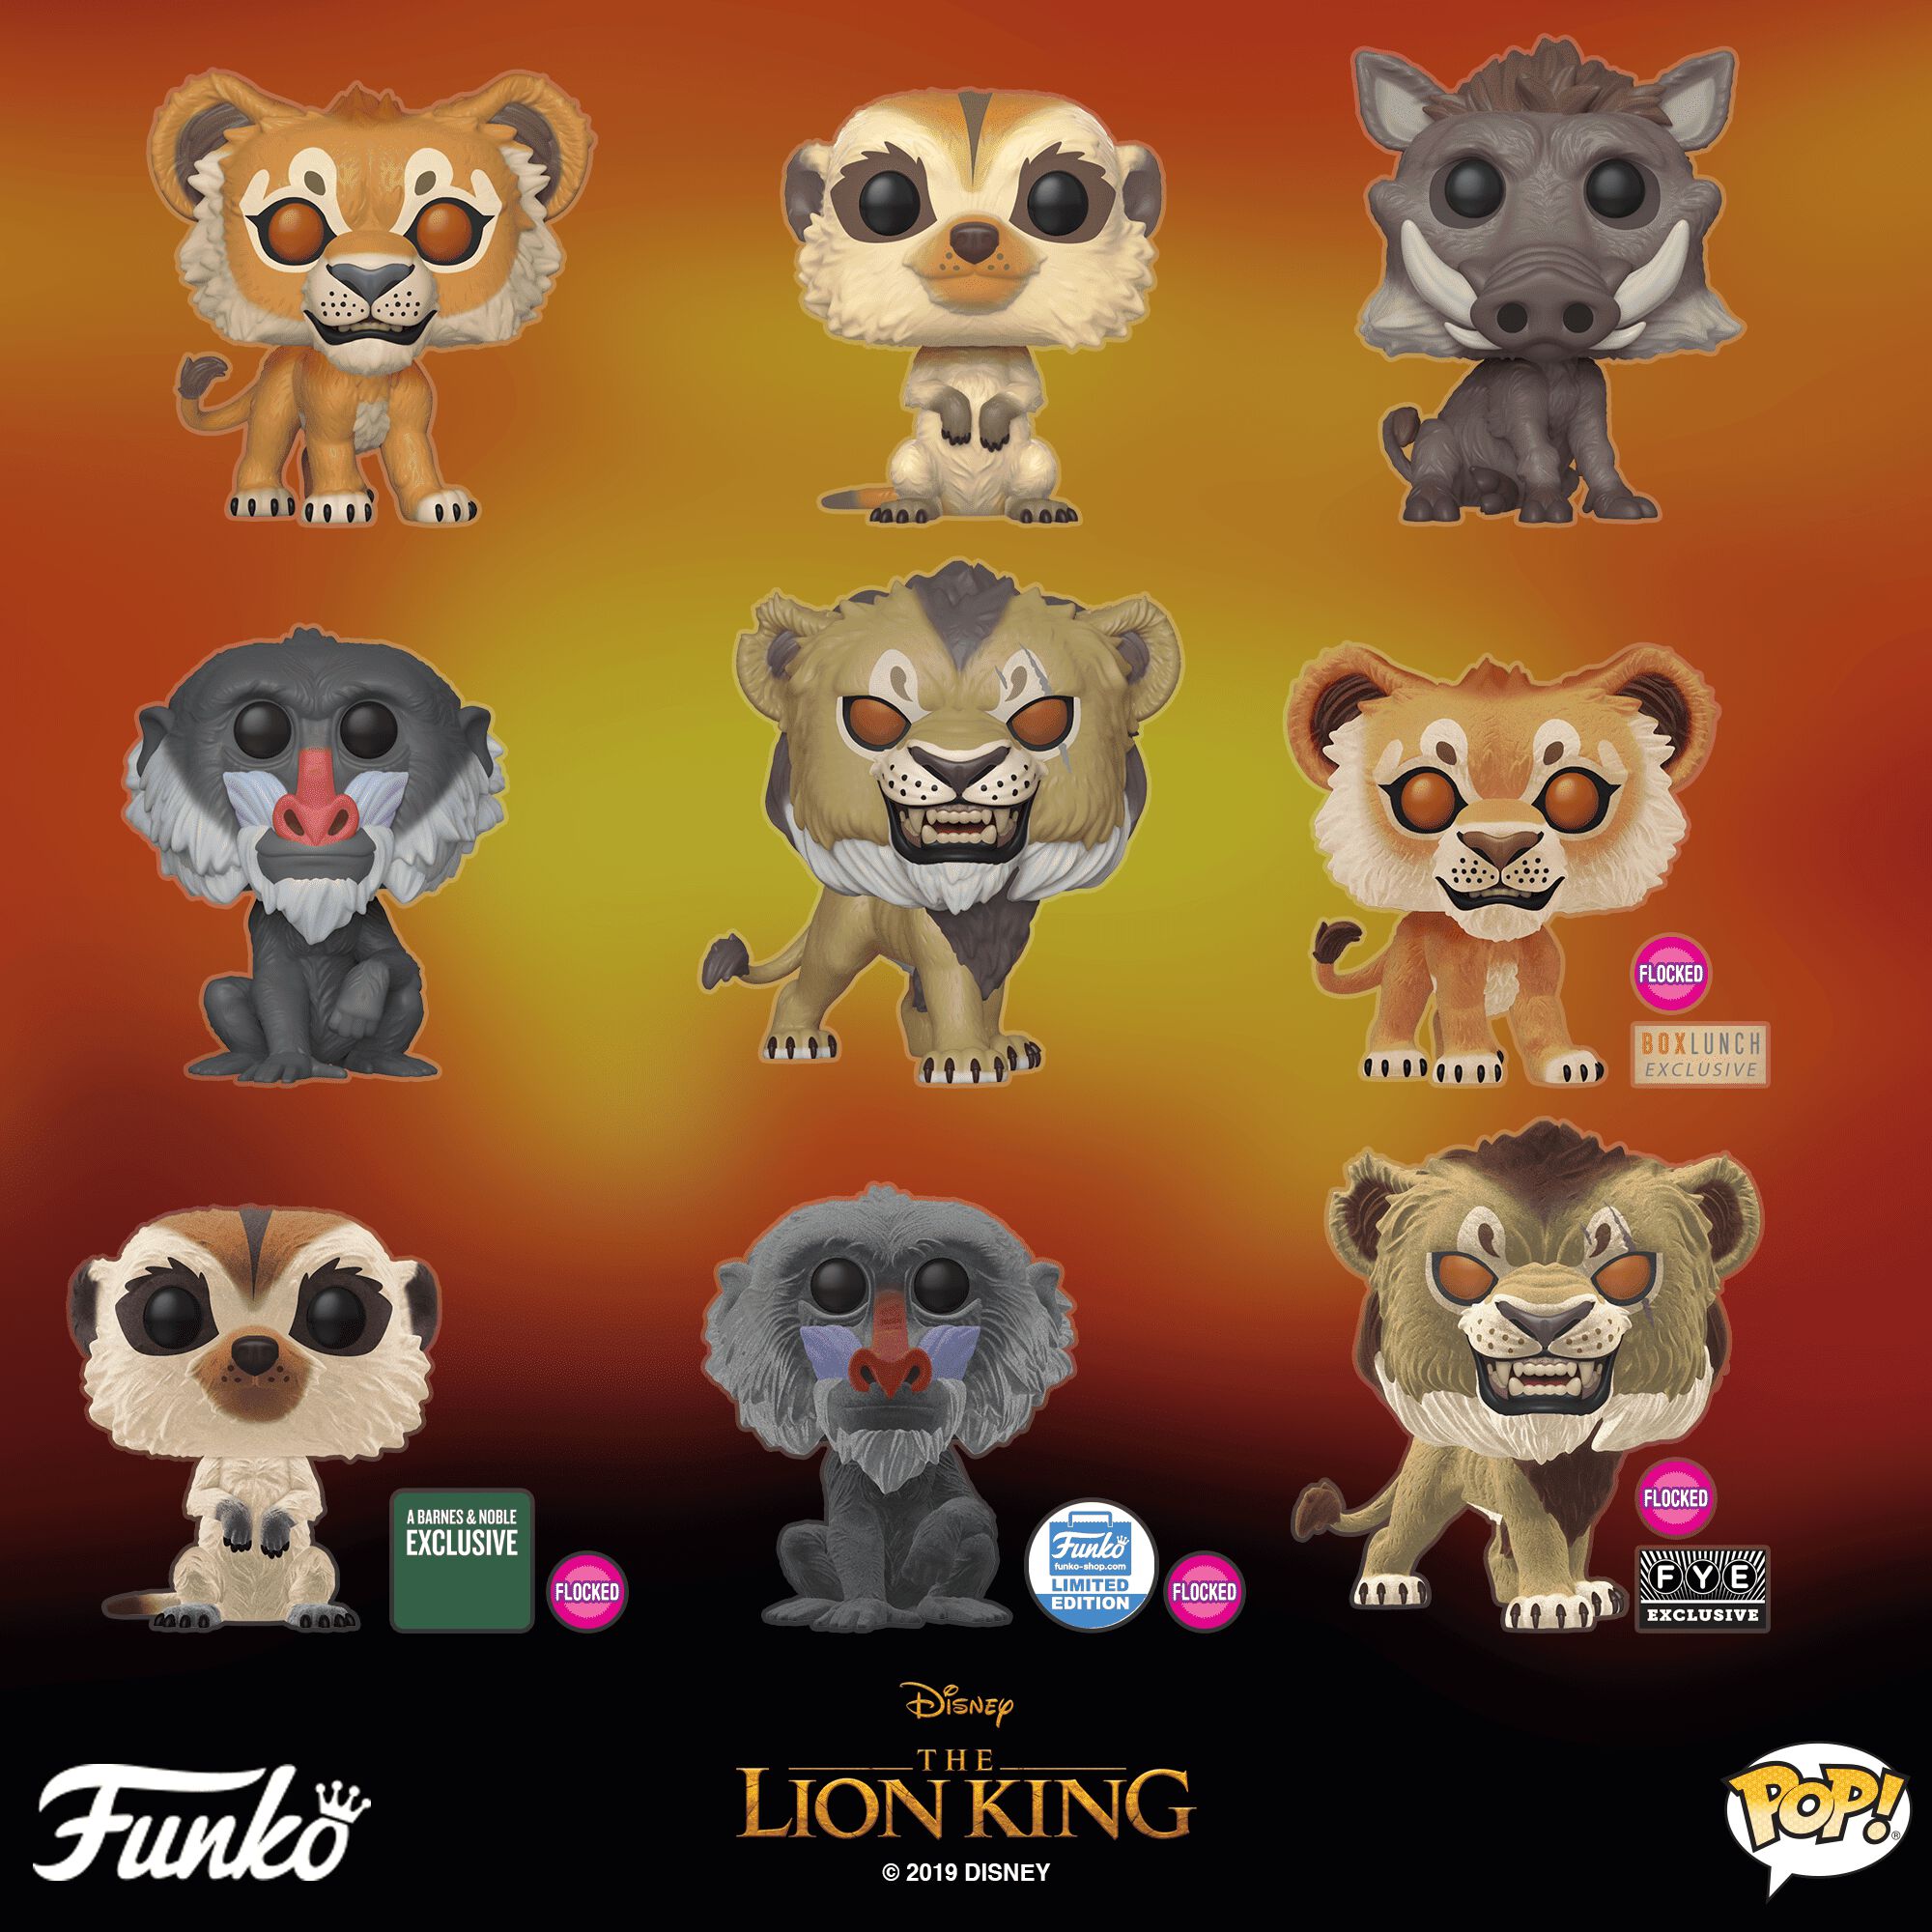 Coming Soon: The King Pop!